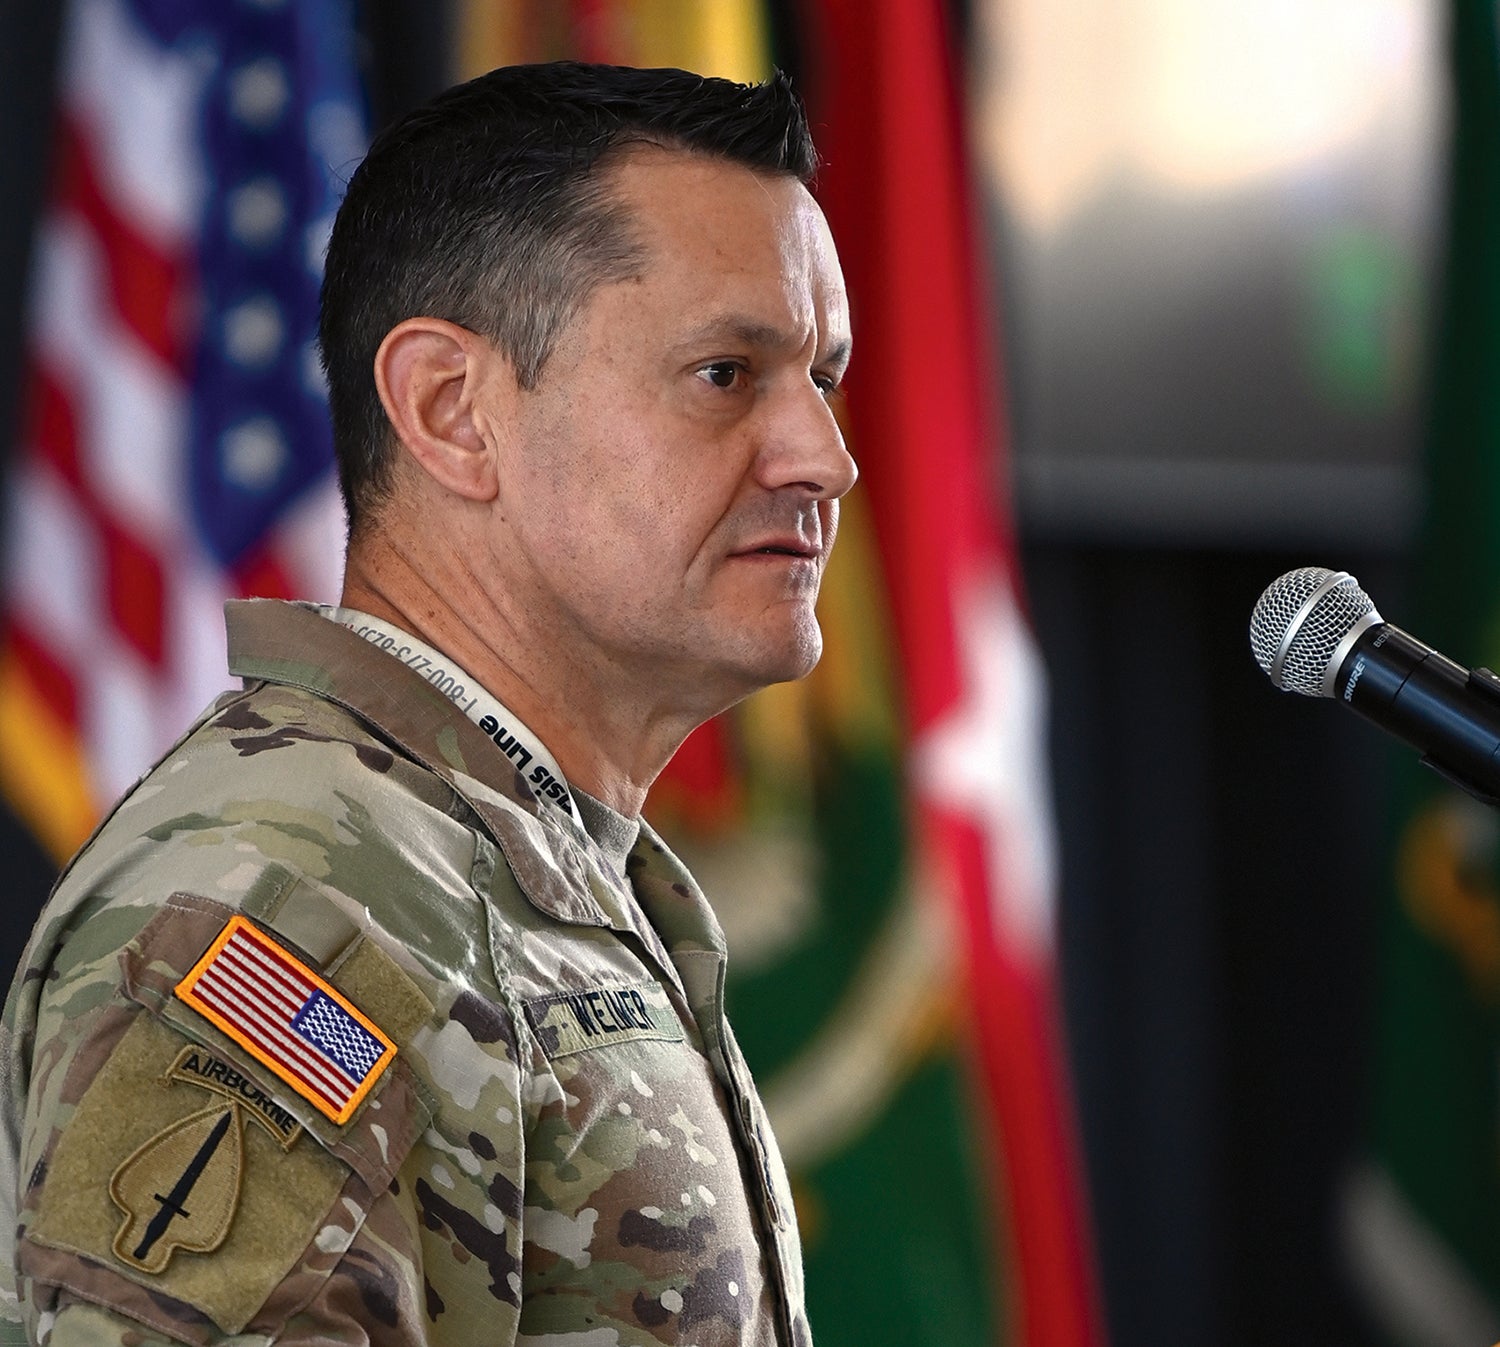 Then-Command Sgt. Maj. Michael Weimer, who was the senior enlisted leader of the U.S. Army Special Operations Command, speaks at Fort Bragg, North Carolina, now known as Fort Liberty, in August 2022. (Credit: U.S. Army/K. Kassens)